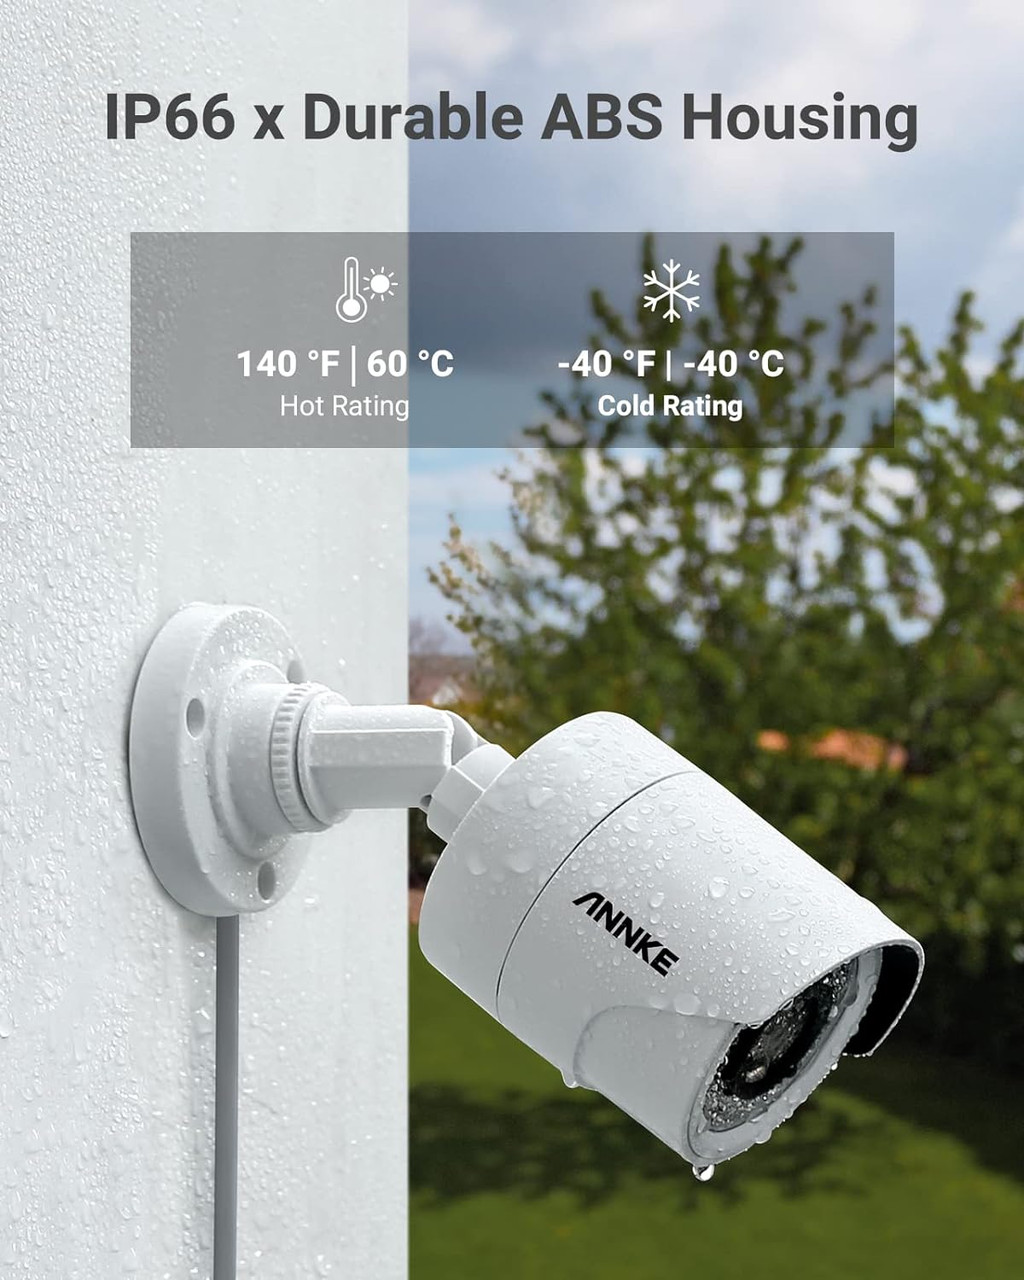 ANNKE 5MP (3K) Lite, 8 CH System, 5MP Lite, 8 Ch Hybrid  5-in1 Surveillance DVR,  4x 2MP  100ft IR Bullet White Camera,   4x 60ft Cable , (1TB HDD) - *Pre-Order